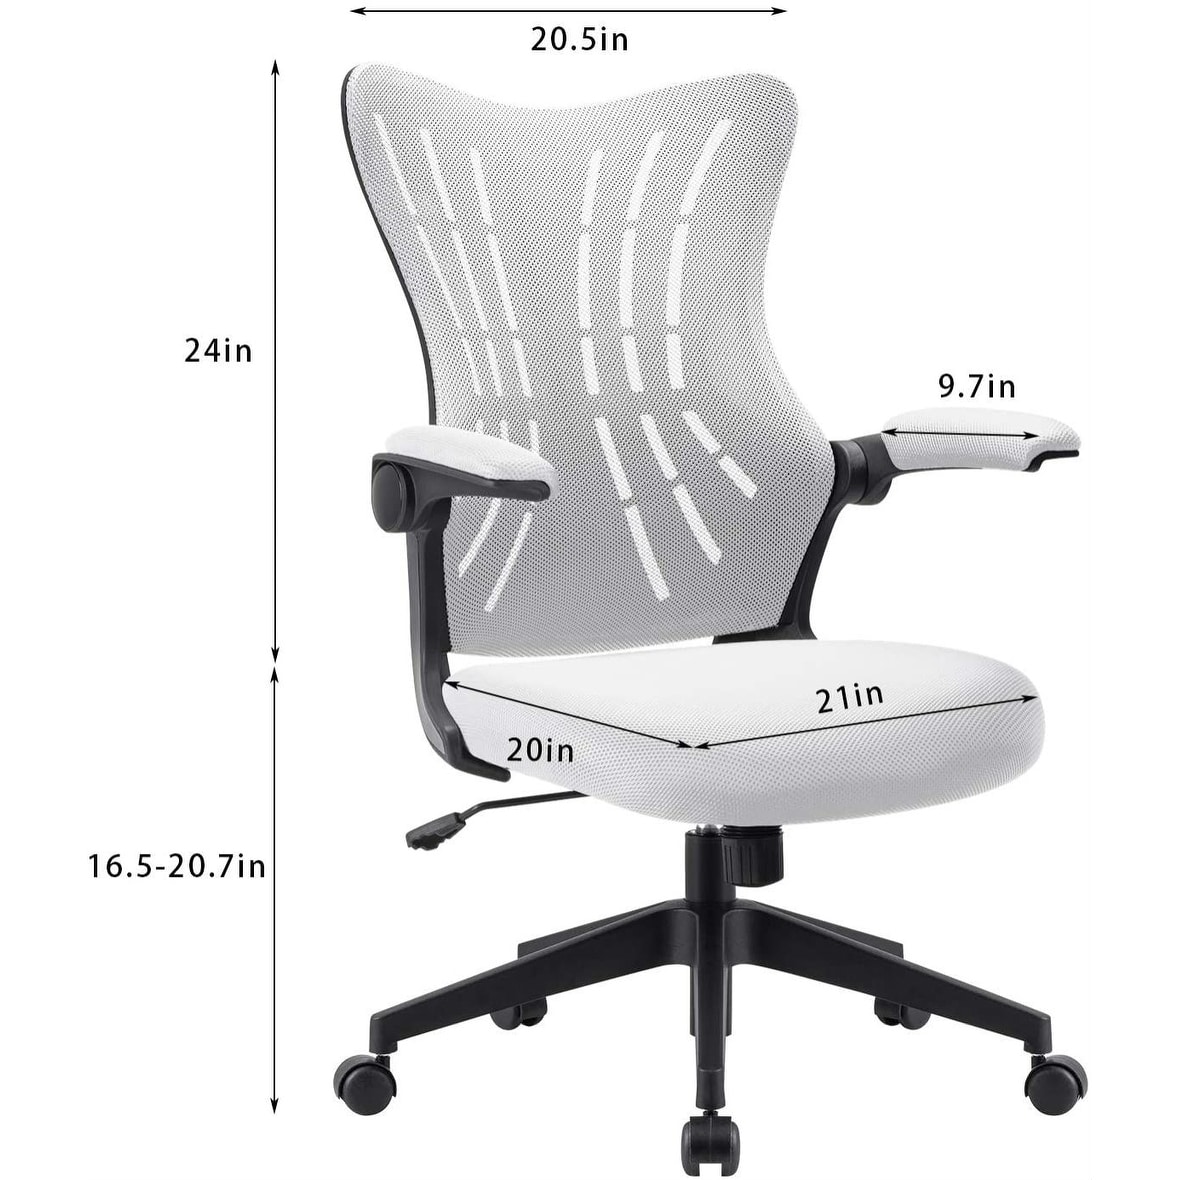 https://ak1.ostkcdn.com/images/products/is/images/direct/1b3f0e687e32d0d1174699c8cbd24fc5d0642399/Homall-Office-Desk-Chair-with-Flip-Arms-Mid-Back-Mesh-Computer-Chair-Swivel-Task-Chair-with-Ergonomic-with-Lumbar-Support.jpg